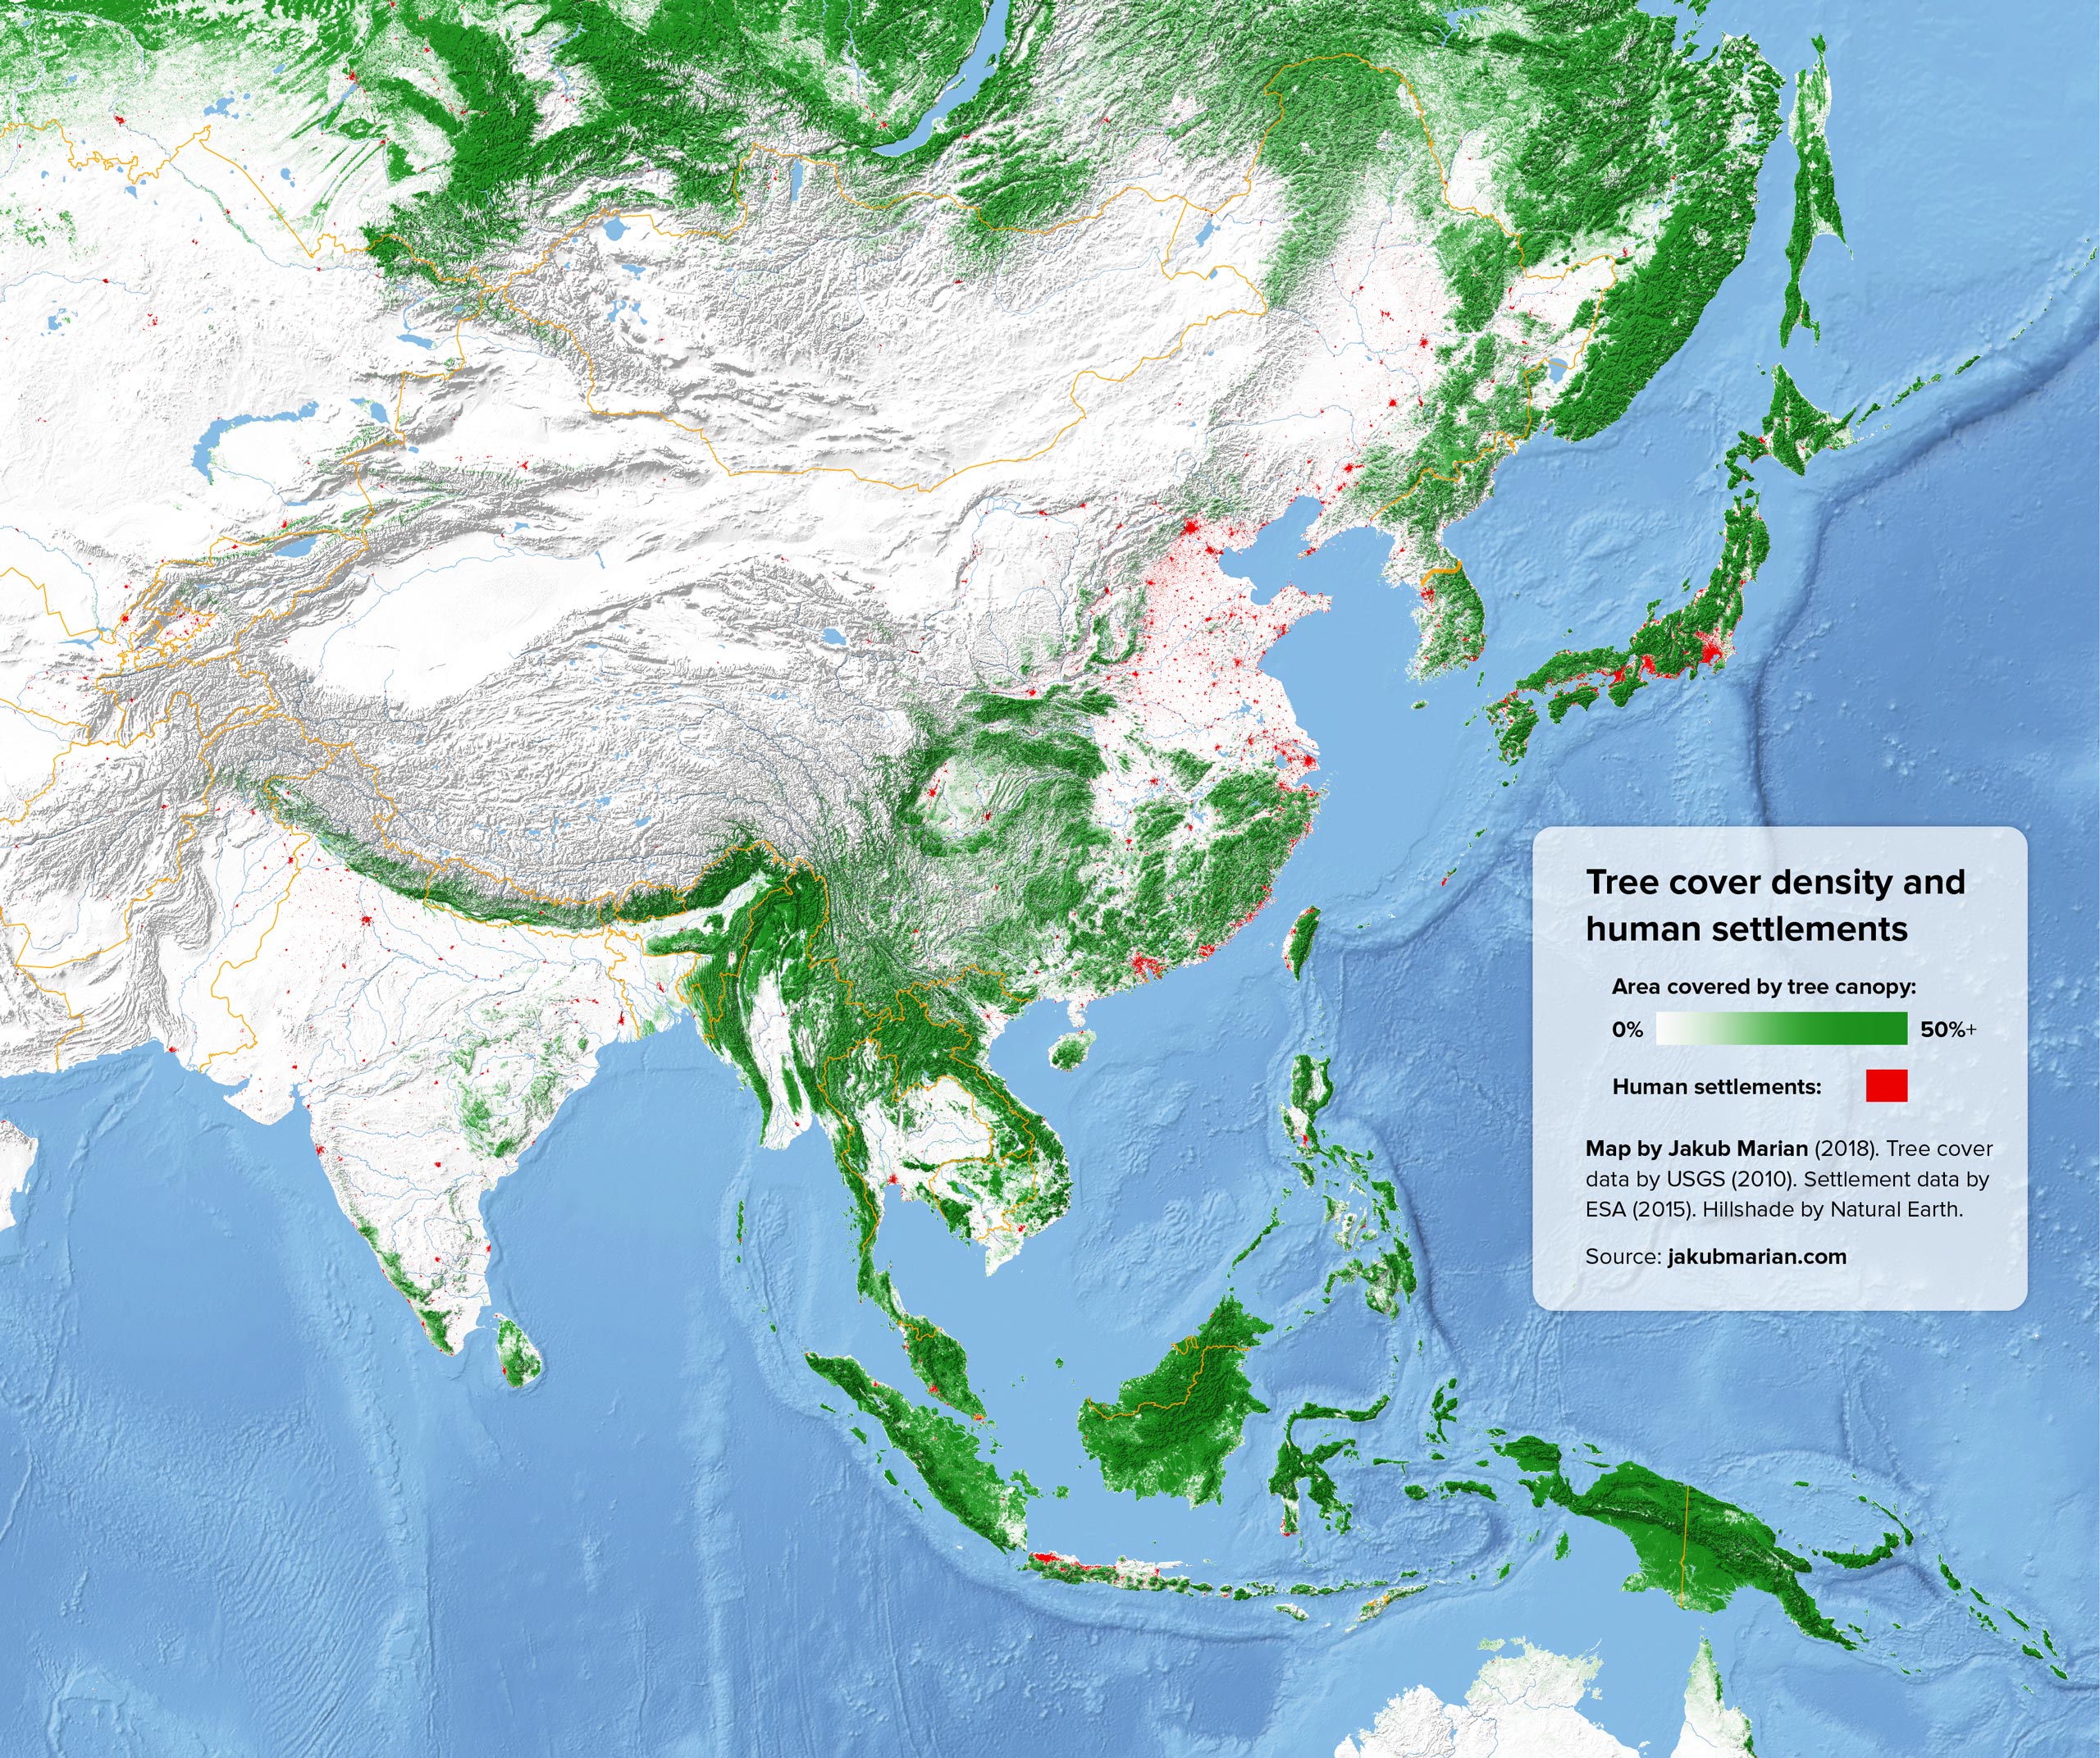 Tree cover and human settlements of South and East Asia